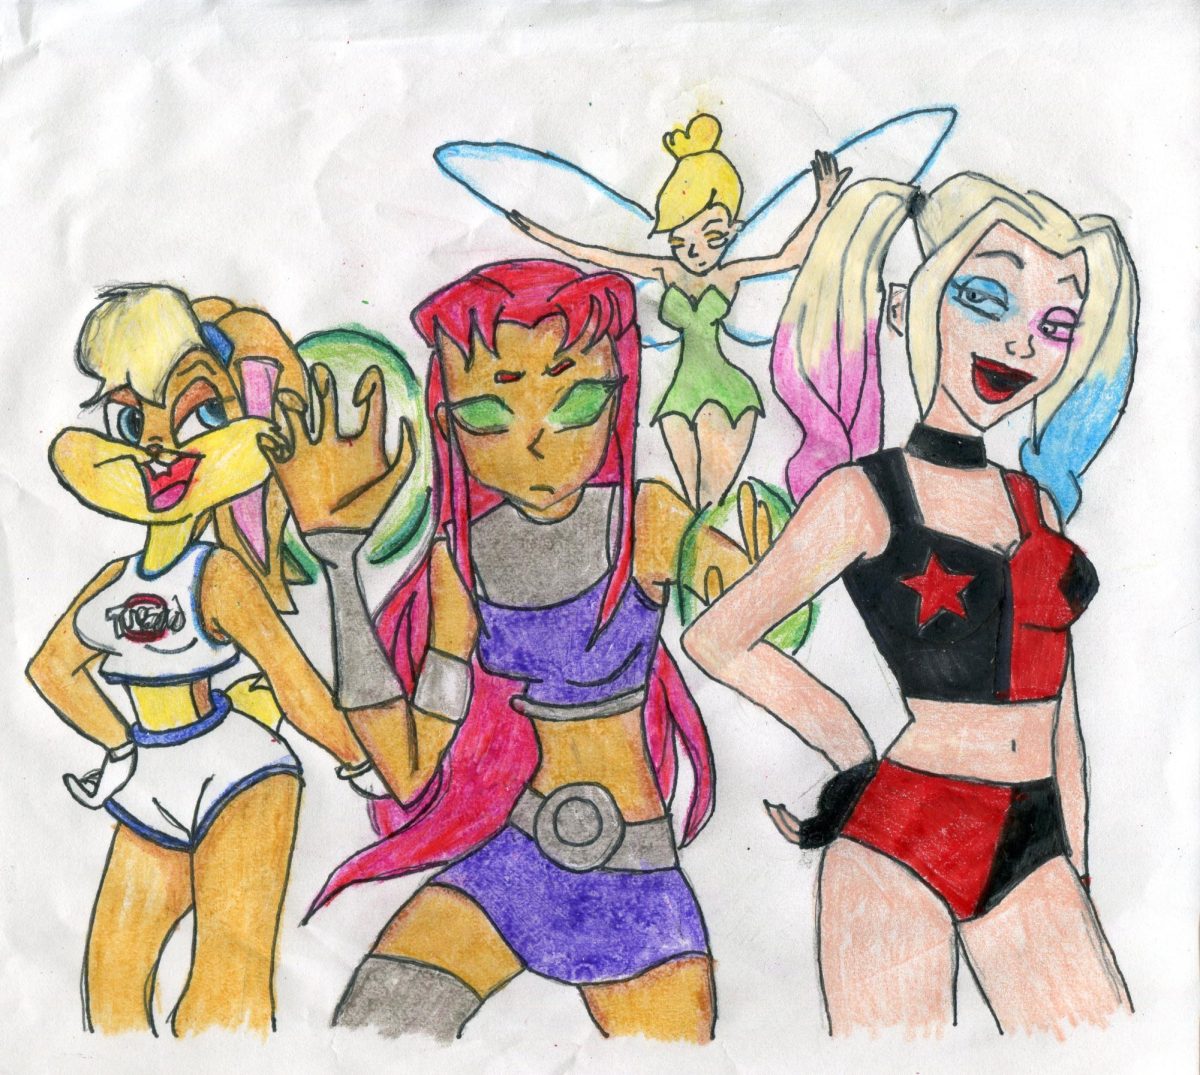 This+drawing+depicts+Lola+Bunny%2C+Starfire%2C+Tinkerbell%2C+and+Harley+Quinn%2C+commonly+over-sexualized+characters+in+popular+culture.+Childrens+entertainment+characters+are+often+turned+into+revealing+costumes+for+Halloween%2C+leading+kids+to+support+the+immoral+actions+of+halloween+costume+companies.